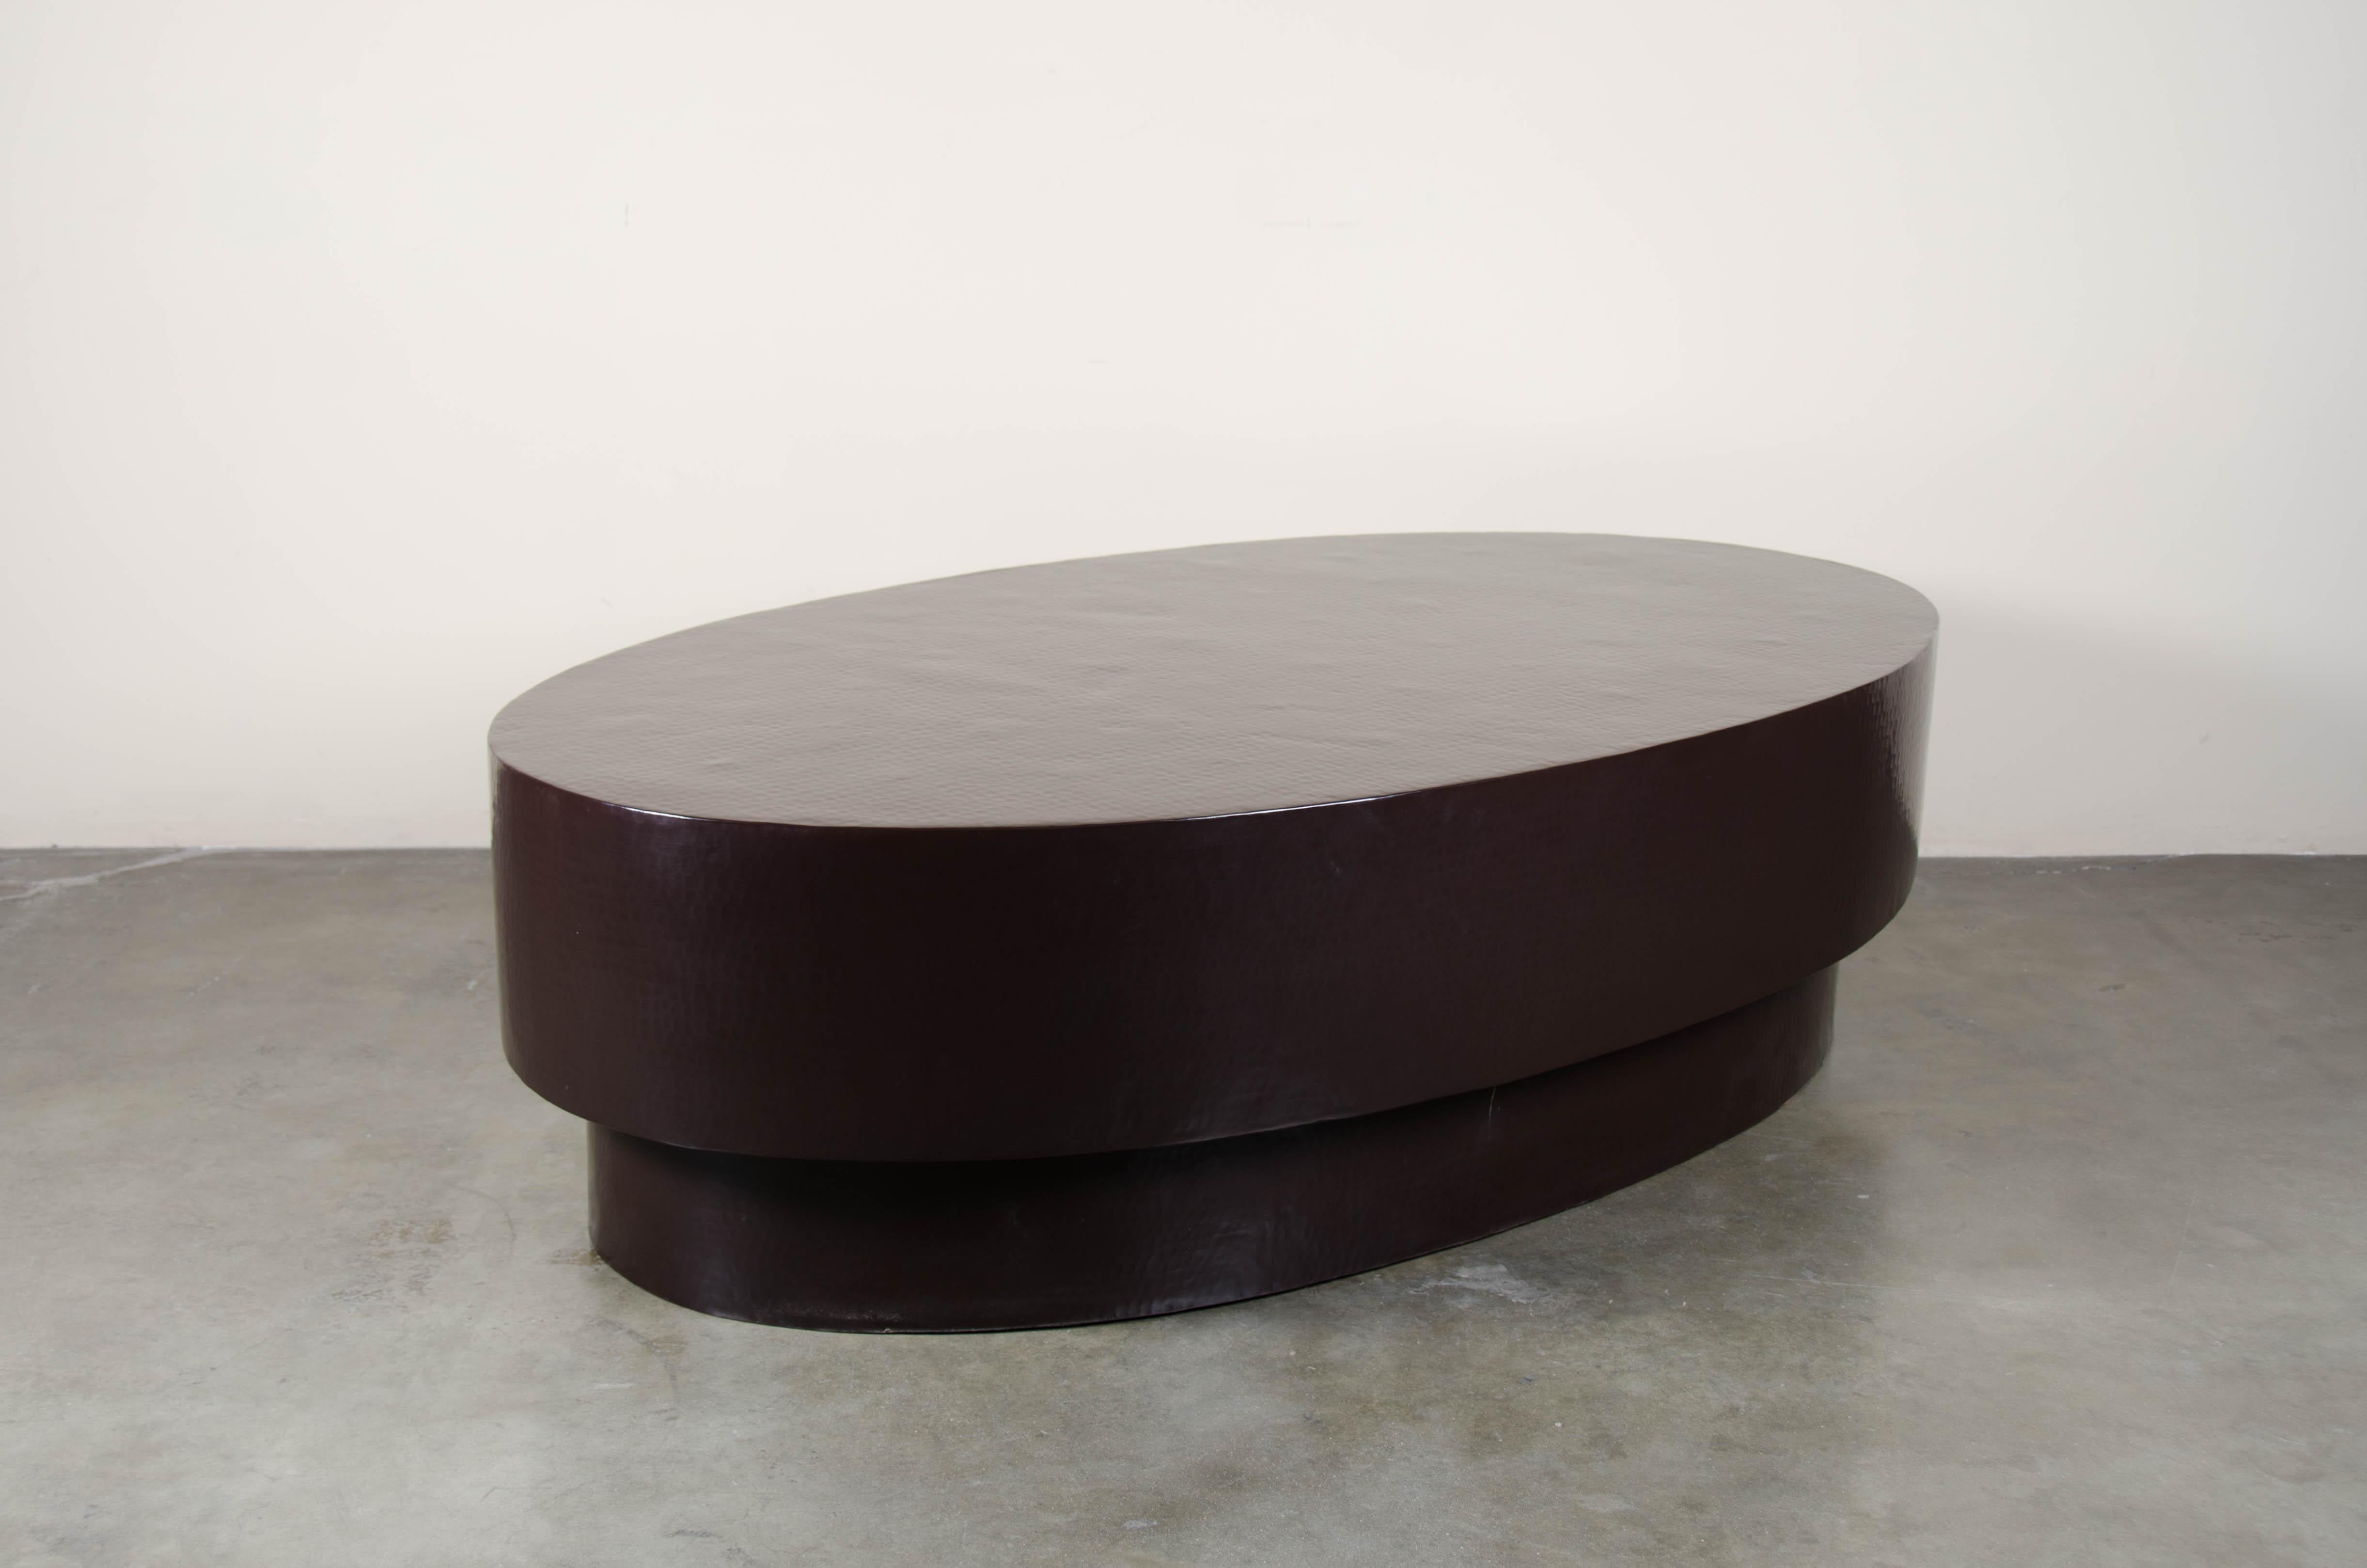 Oval Coffee Table, Copper by Robert Kuo, Hand Repoussé, Limited Edition In New Condition For Sale In Los Angeles, CA